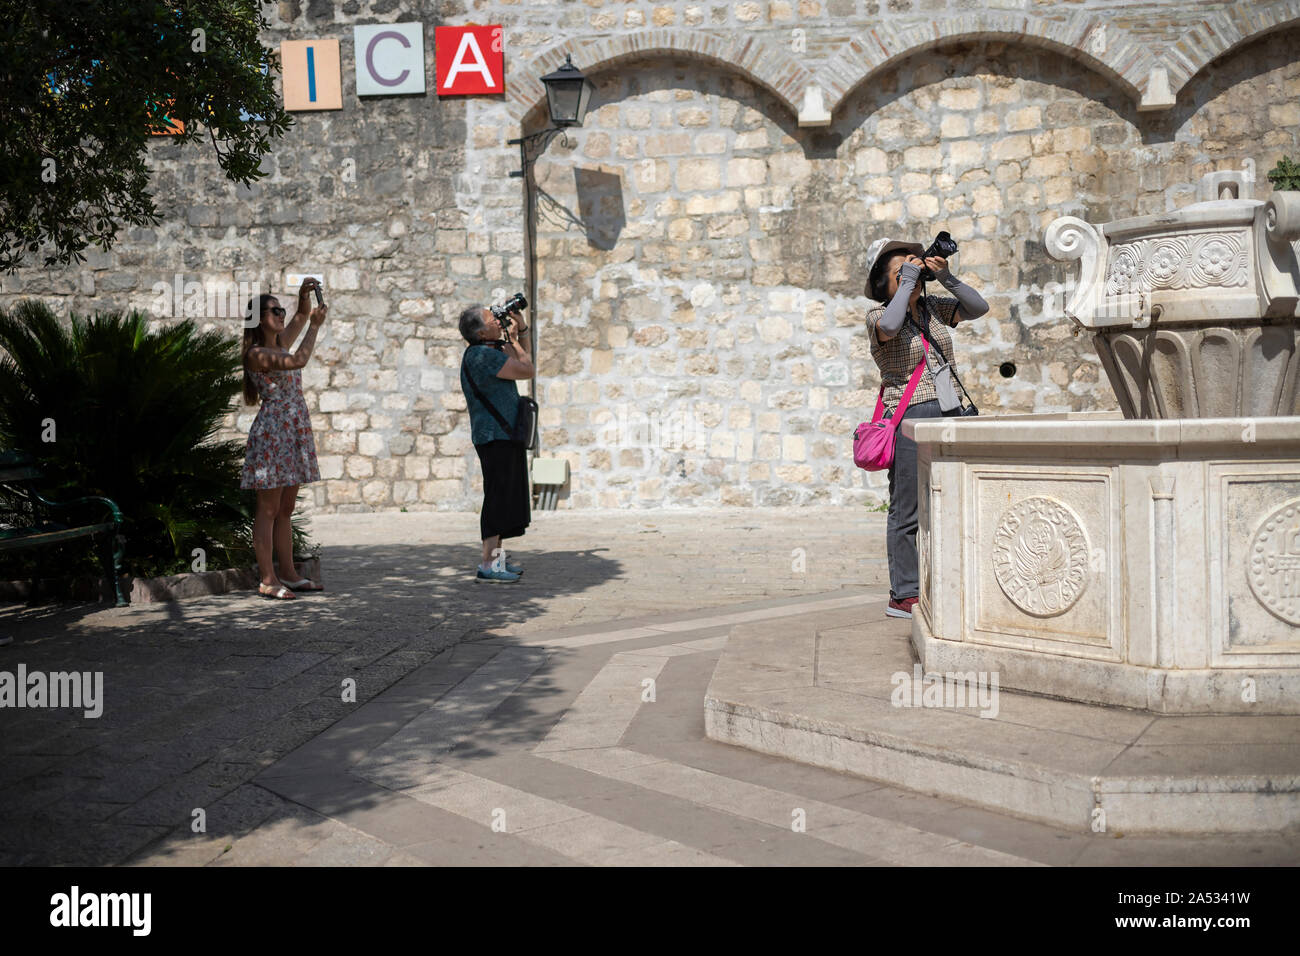 Montenegro, Sep 17, 2019: Tourists taking pictures of Kotor Old Town Stock Photo